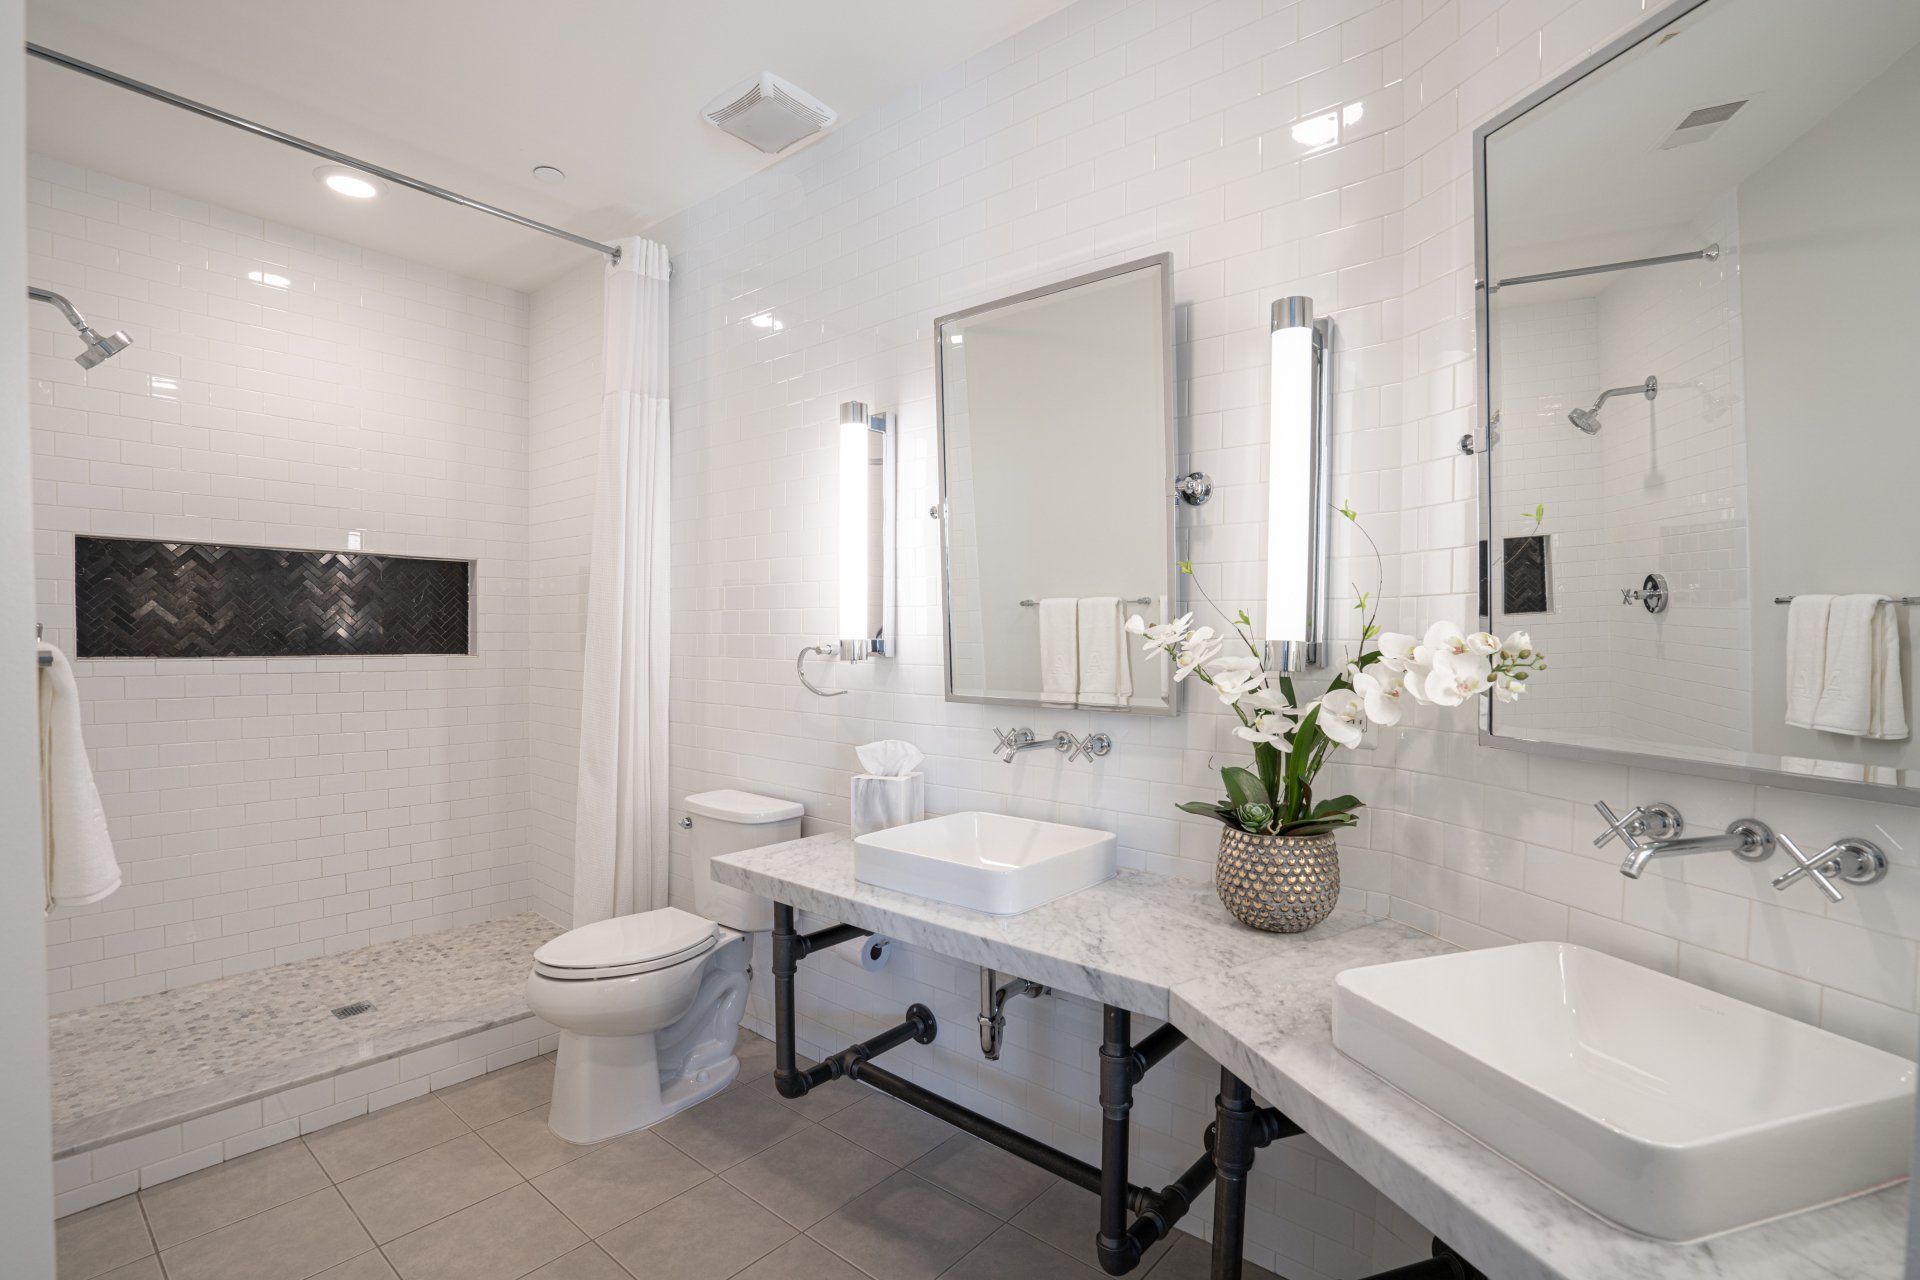 Bathroom Remodeling Services Near You